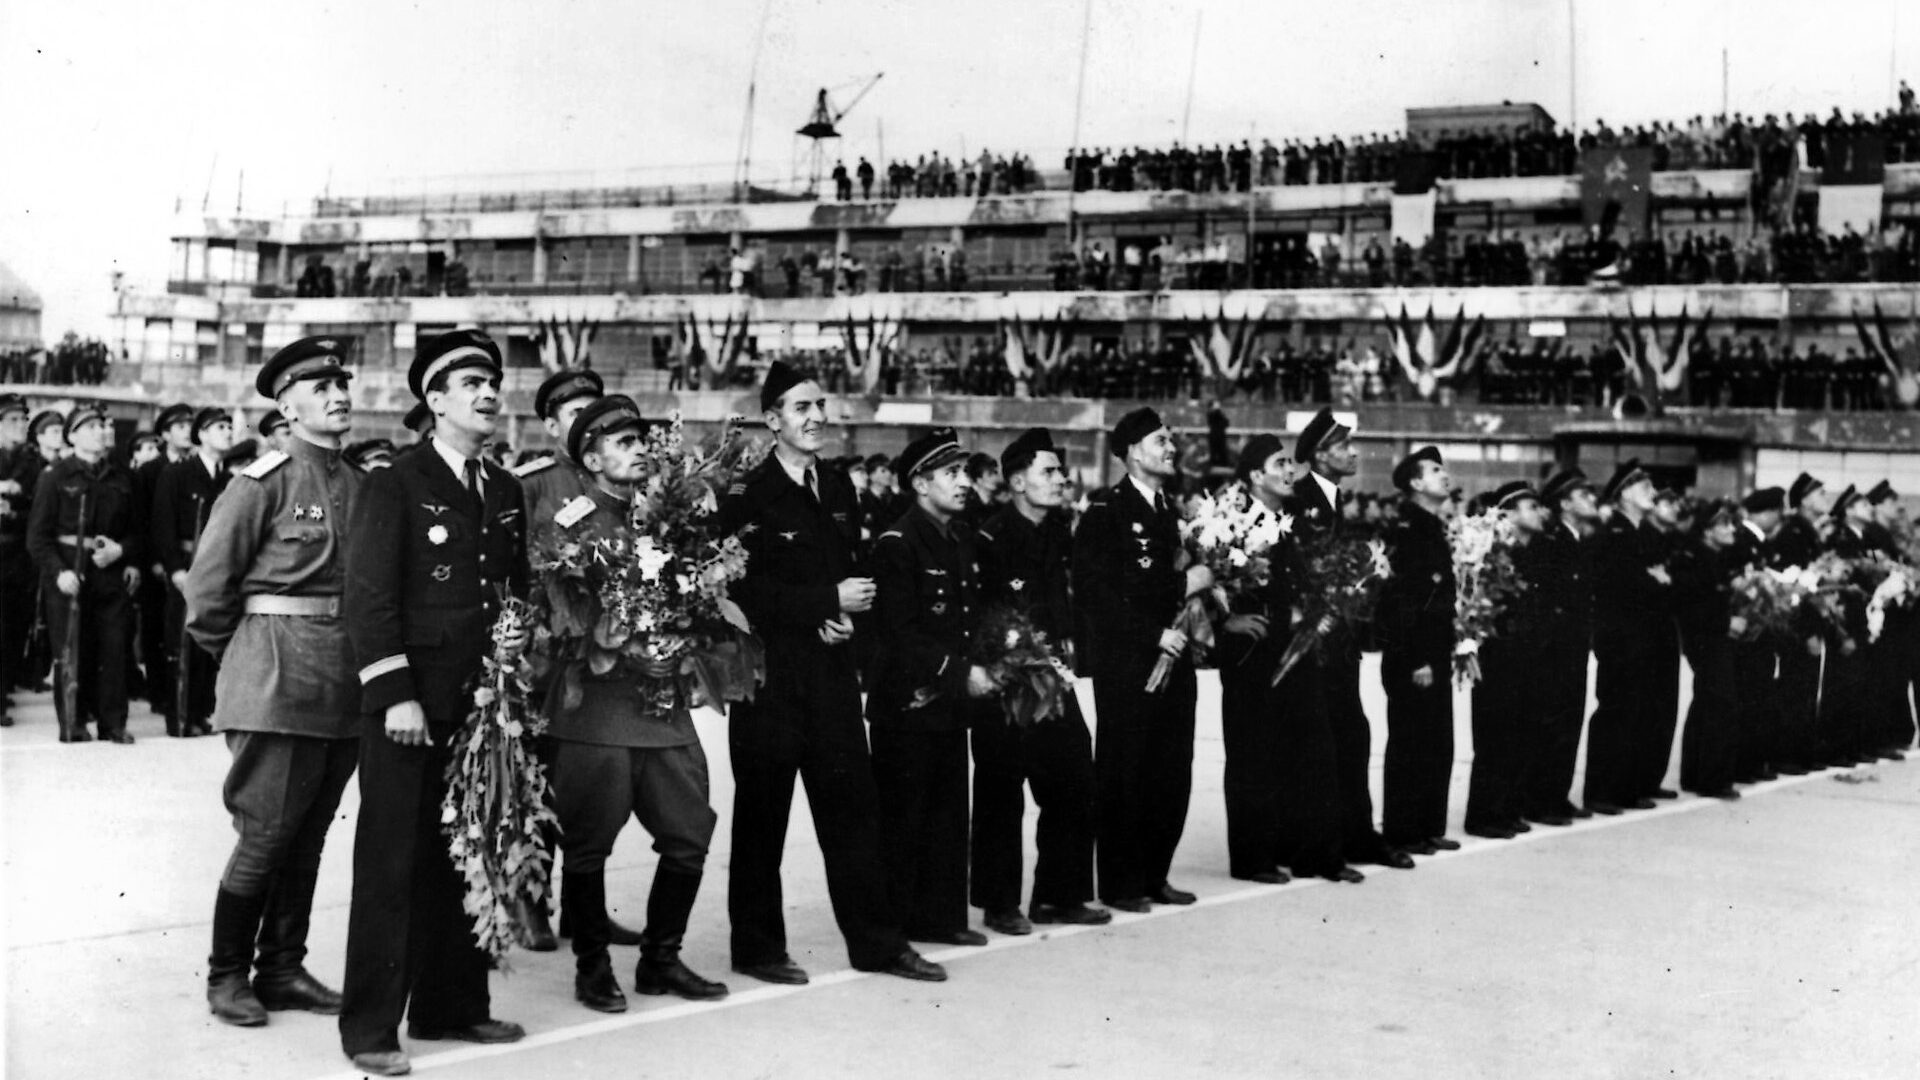 Upon their return to France in 1945, pilots of the Normandie Niemen are greeted at Bourget aerodrome. The group was hailed as heroes, and Roger Sauvage finished World War II with 16 confirmed aerial victories.